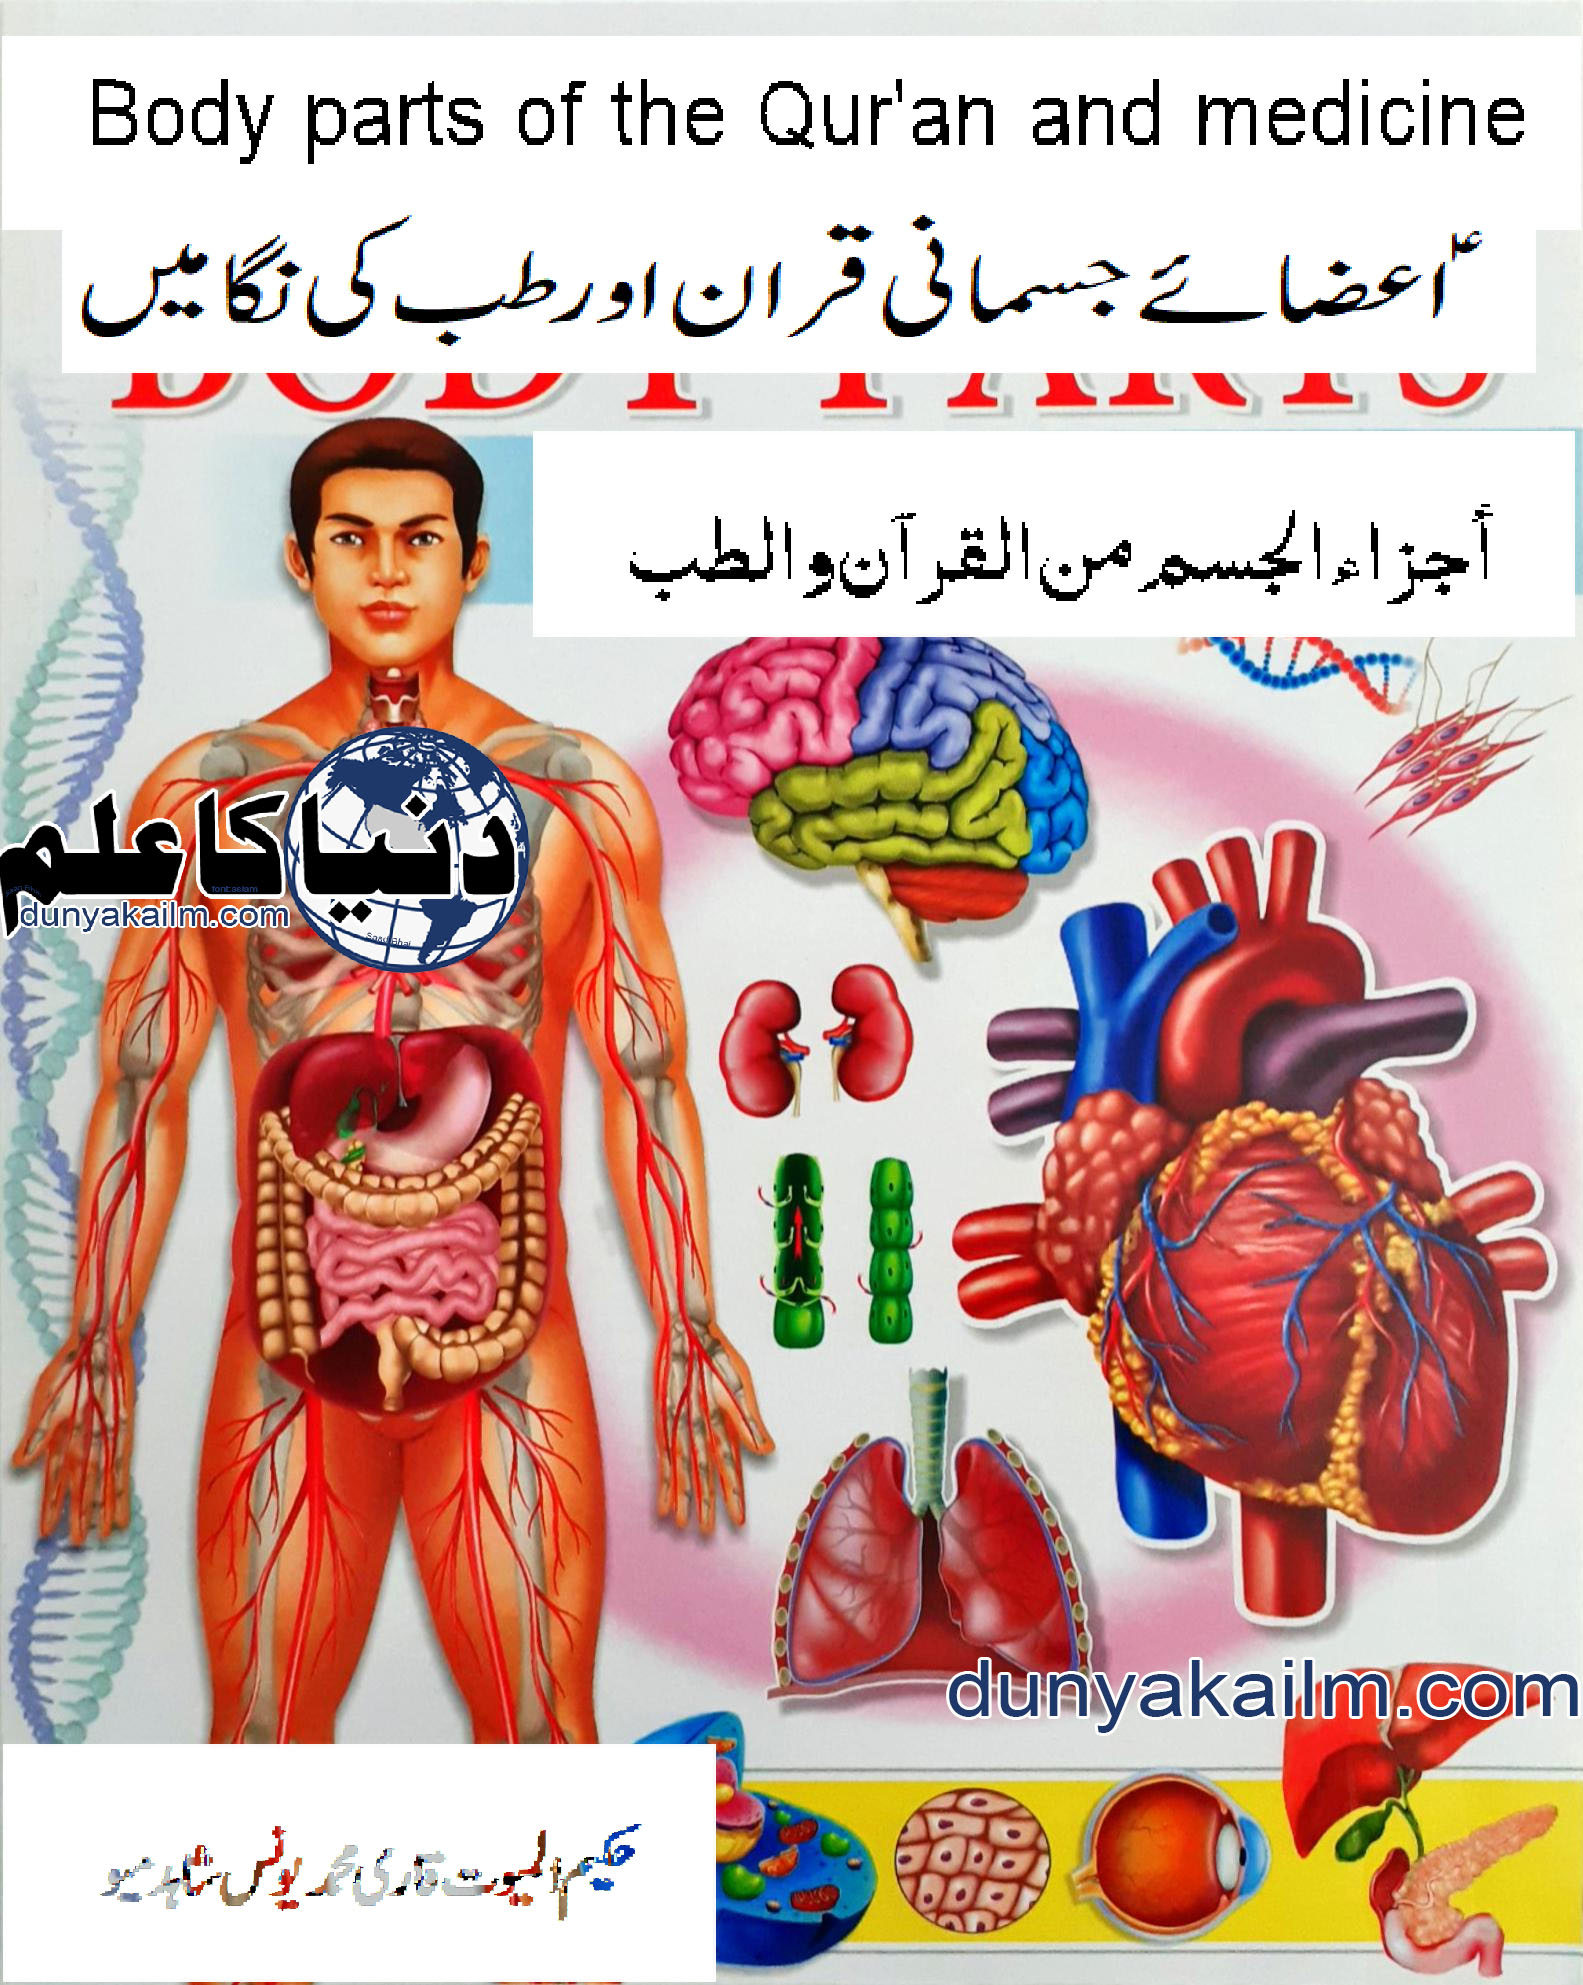 Body parts of the Qur'an and medicine
